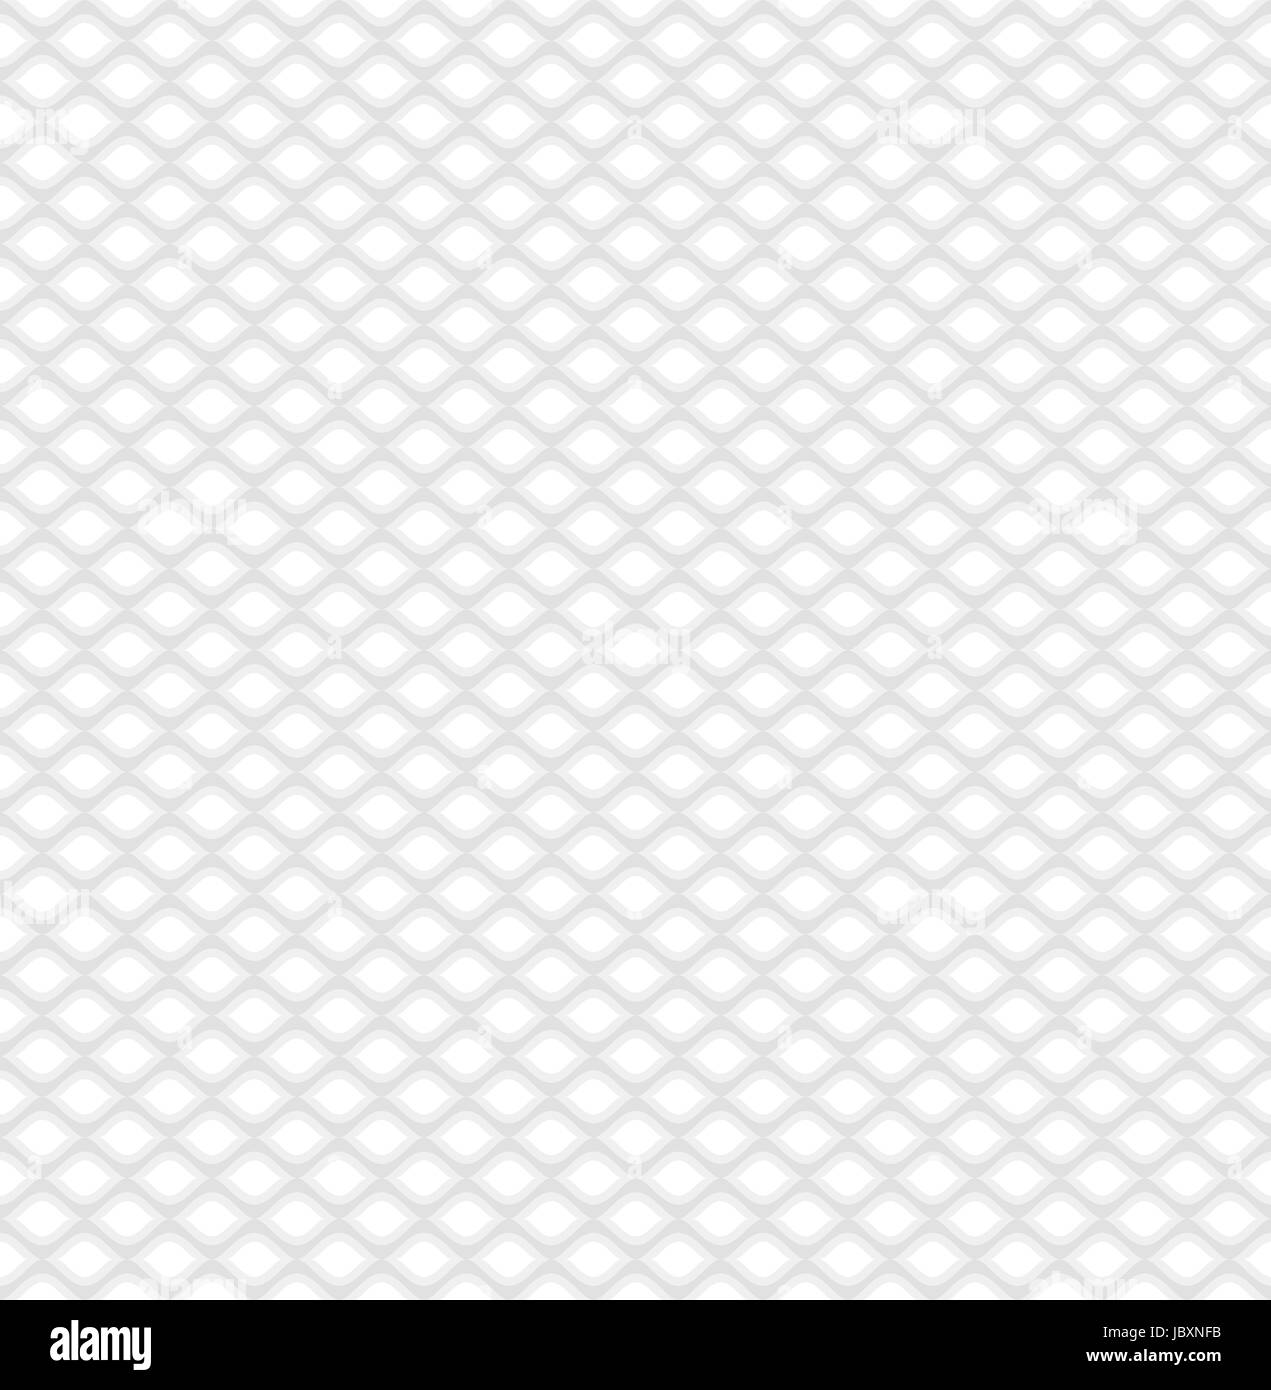 seamless gray and white colored abstract background vector illustration Stock Photo